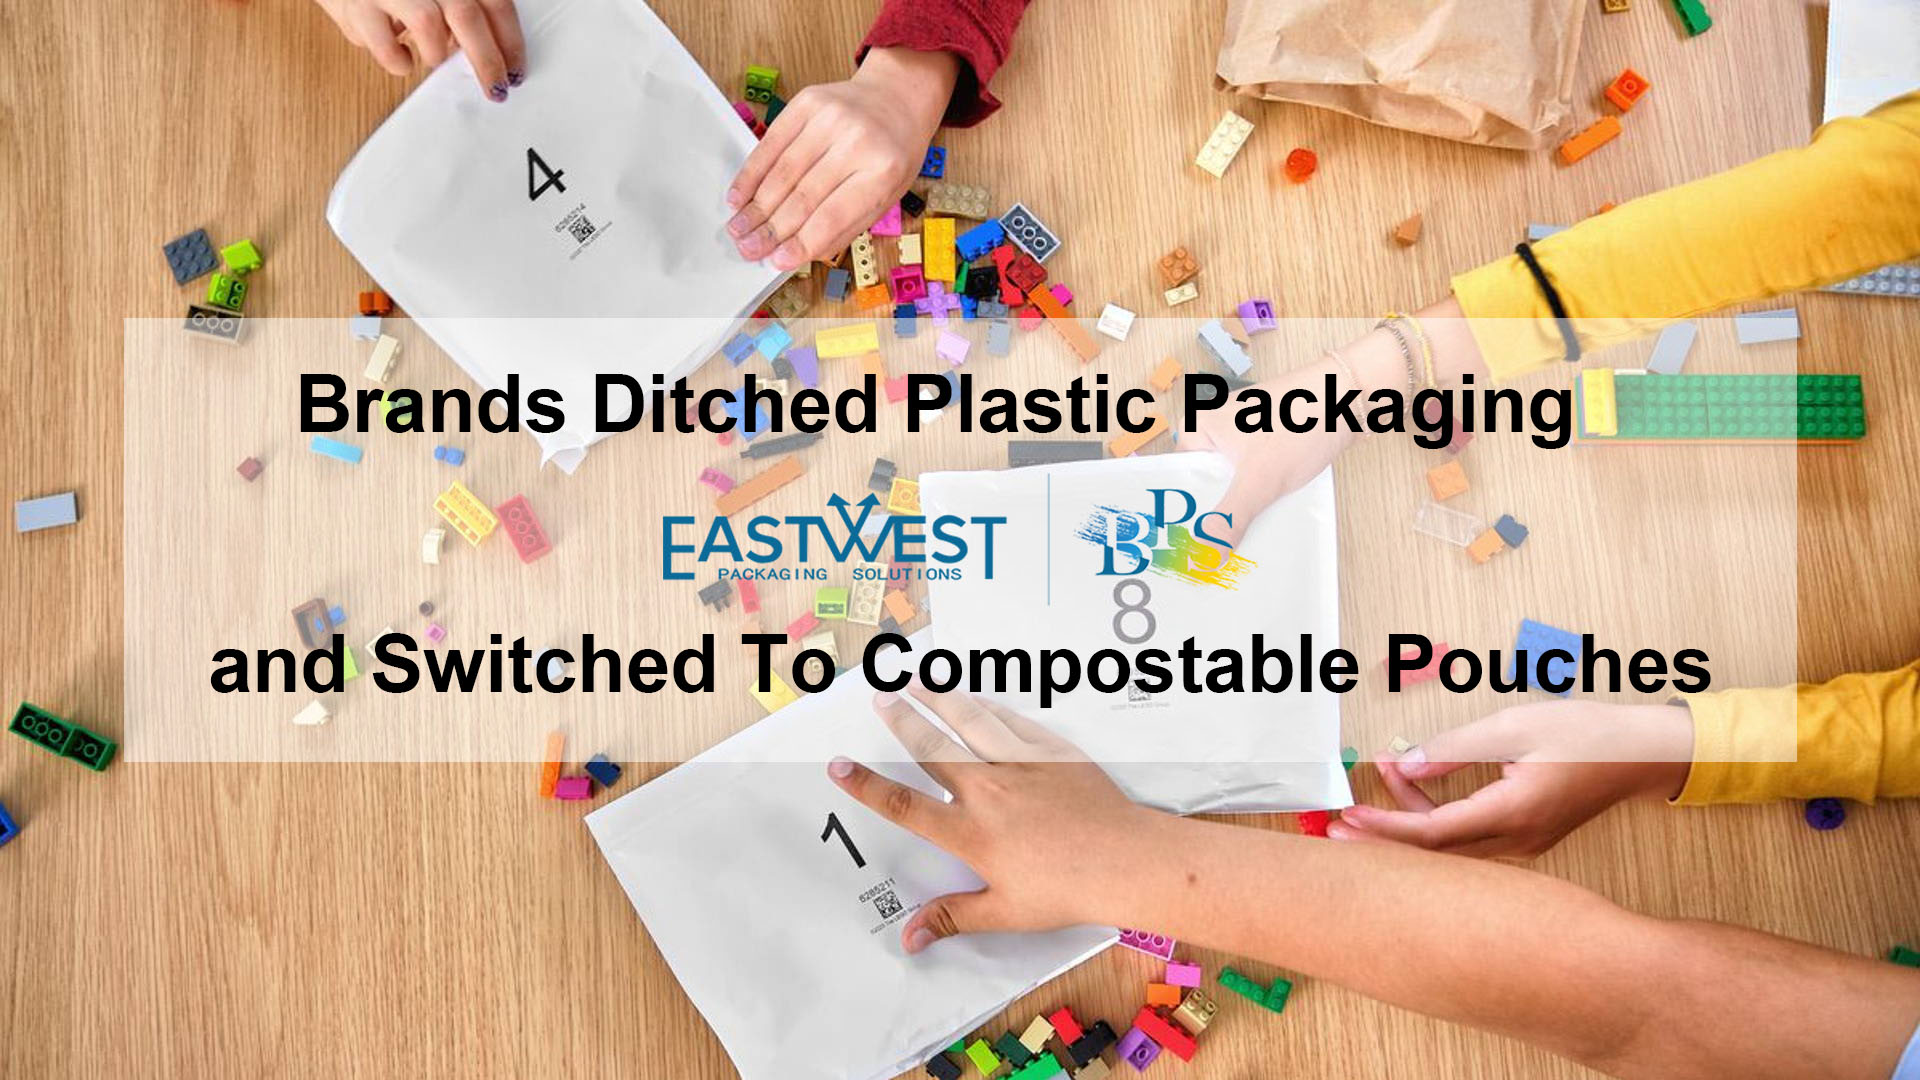 Brands Ditched Plastic Packaging and Switched To Compostable Pouches